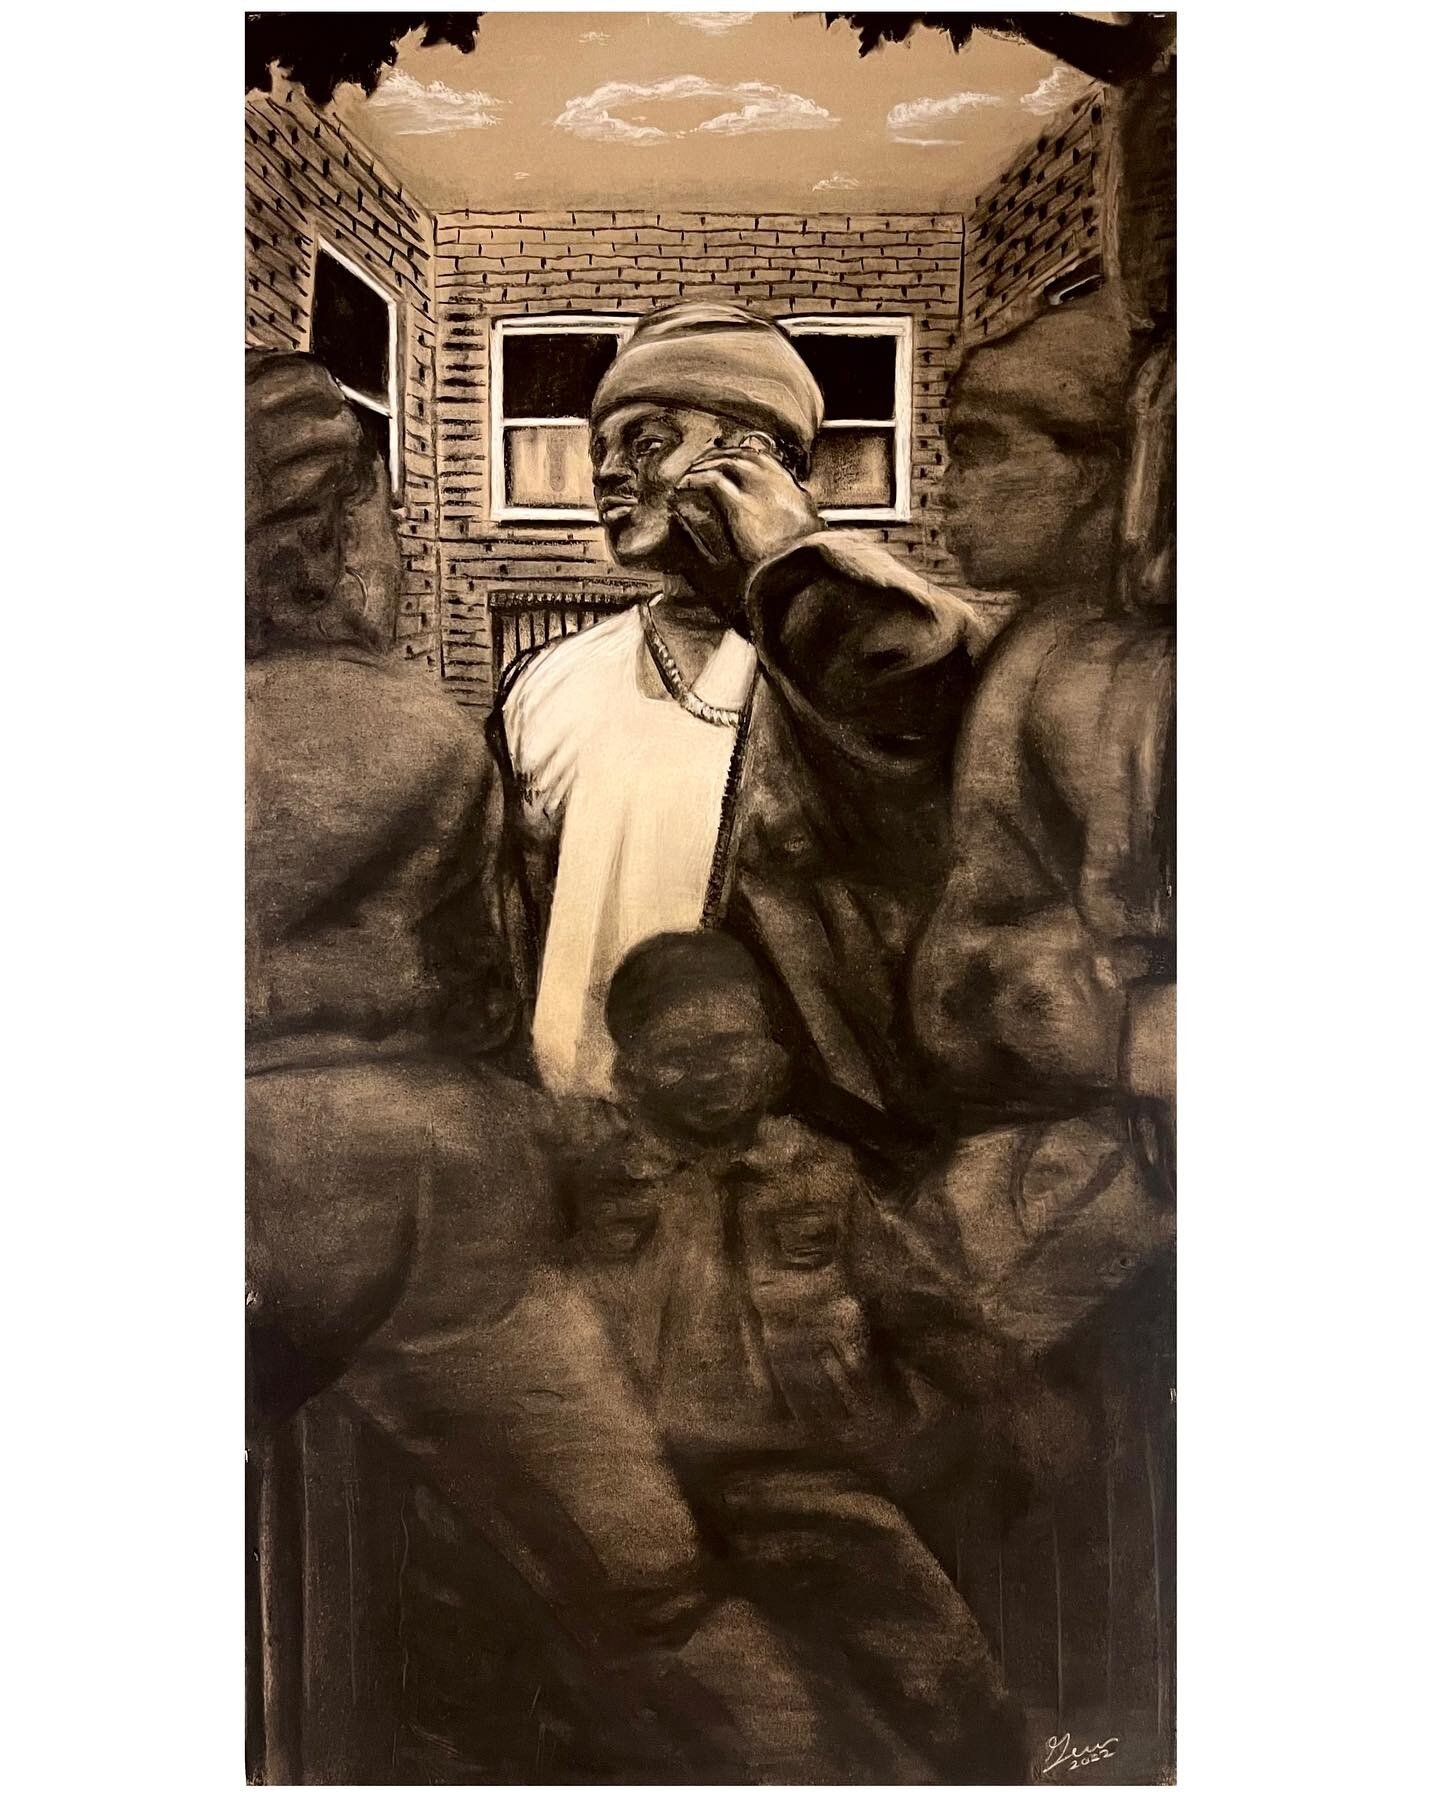 👼 &rdquo;Neighborhood Heroes&rdquo; 2022

Charcoal Study on Wrapping Paper

Sb: I had to reupload this because the first picture really wasn&rsquo;t doing it justice, art on the internet is never as good as it is in person, but I&rsquo;ll be damned 